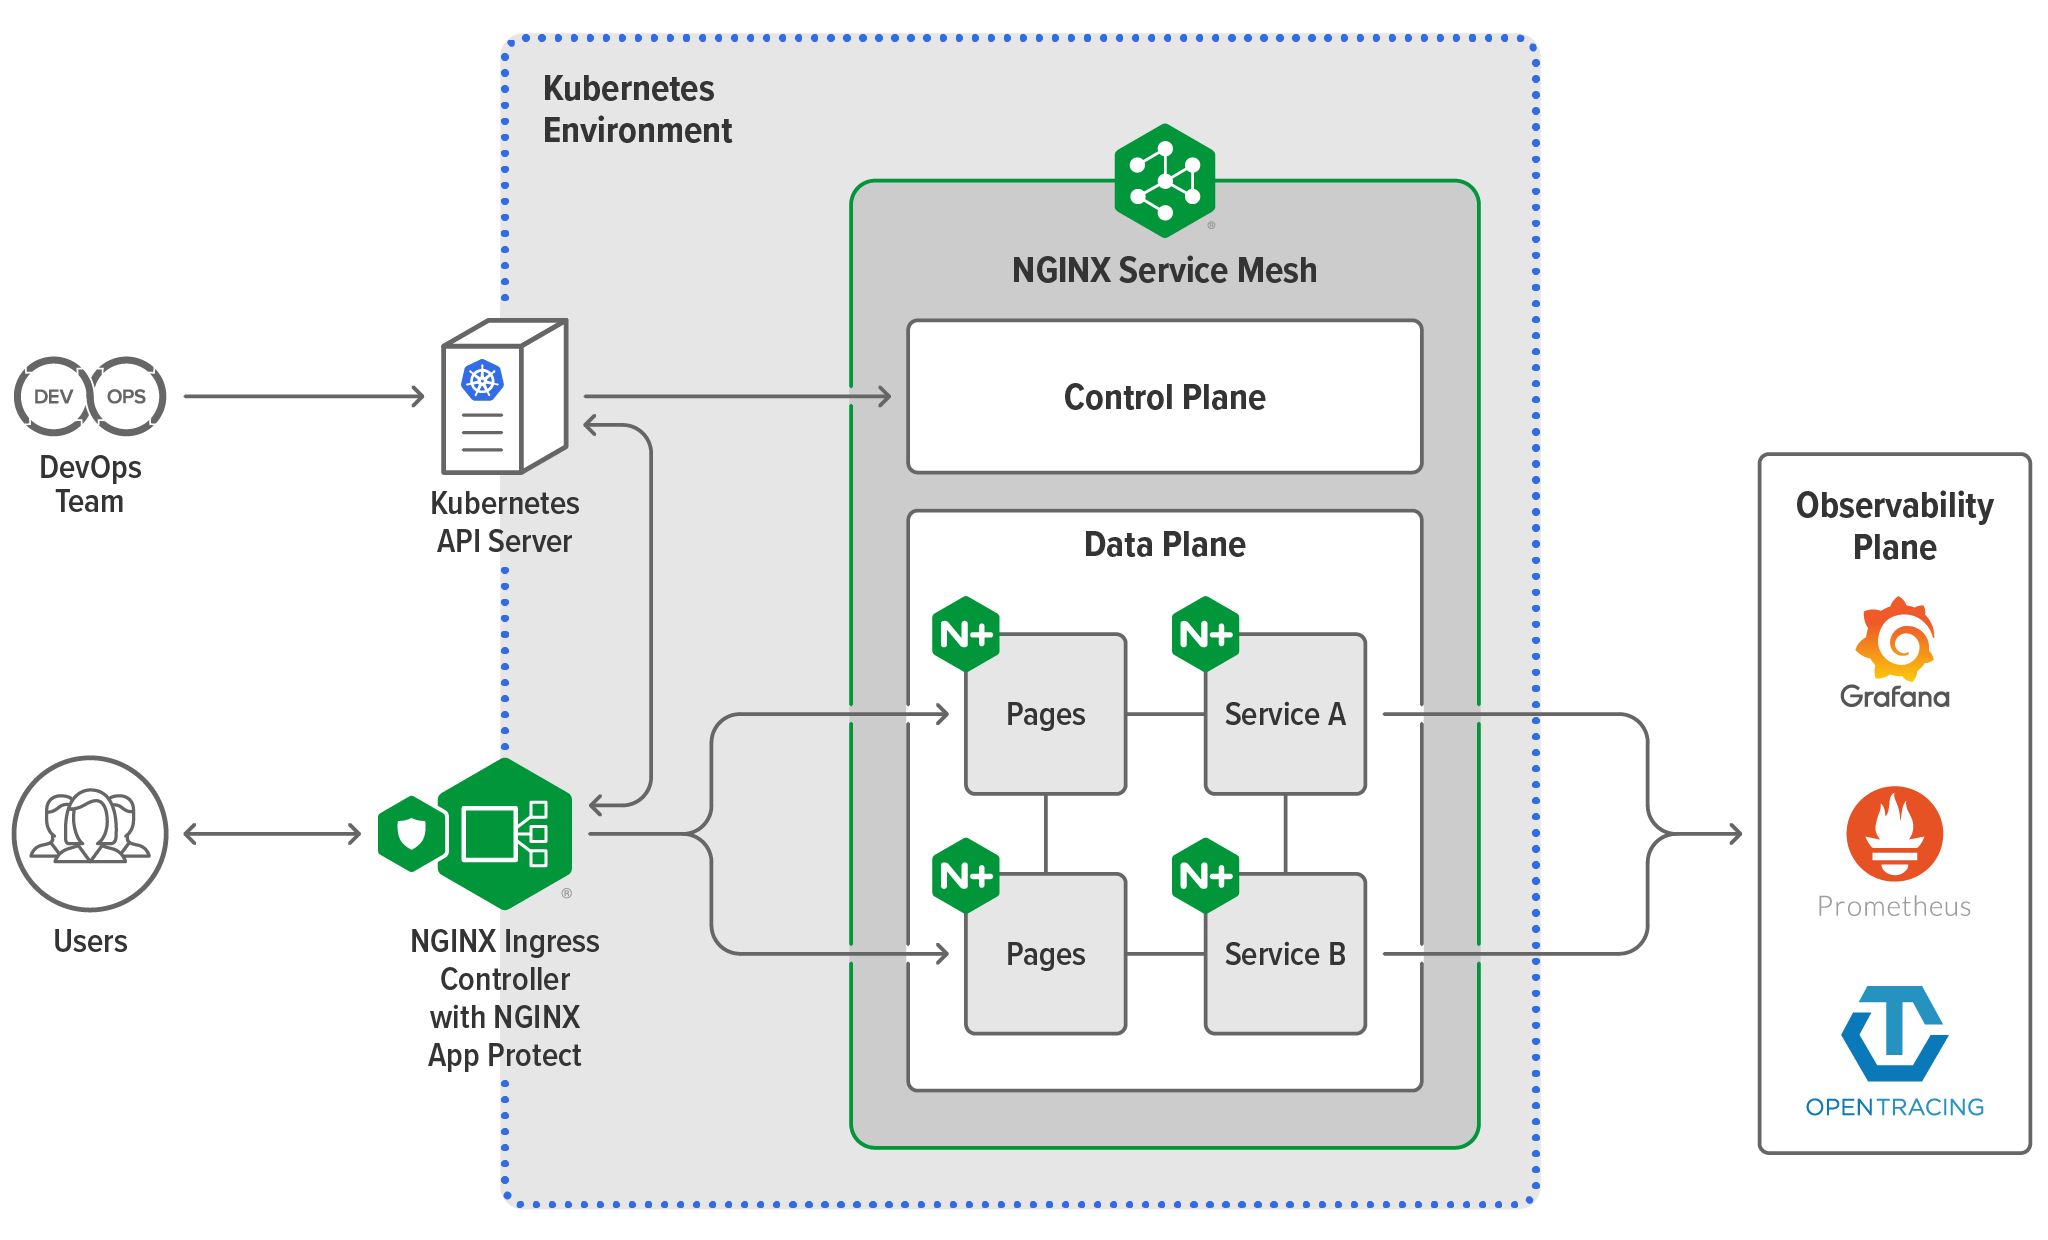 Diagram depicting the ecosystem for NGINX Server Mesh, with individual users and DevOps teams as users, a Kubernetes API server and NGINX Ingress Controller with NGINX App Protect at the edge of the K8s environment, NGINX Service Mesh in the environment, and on the observability plane Grafana, Prometheus, and OpenTracing